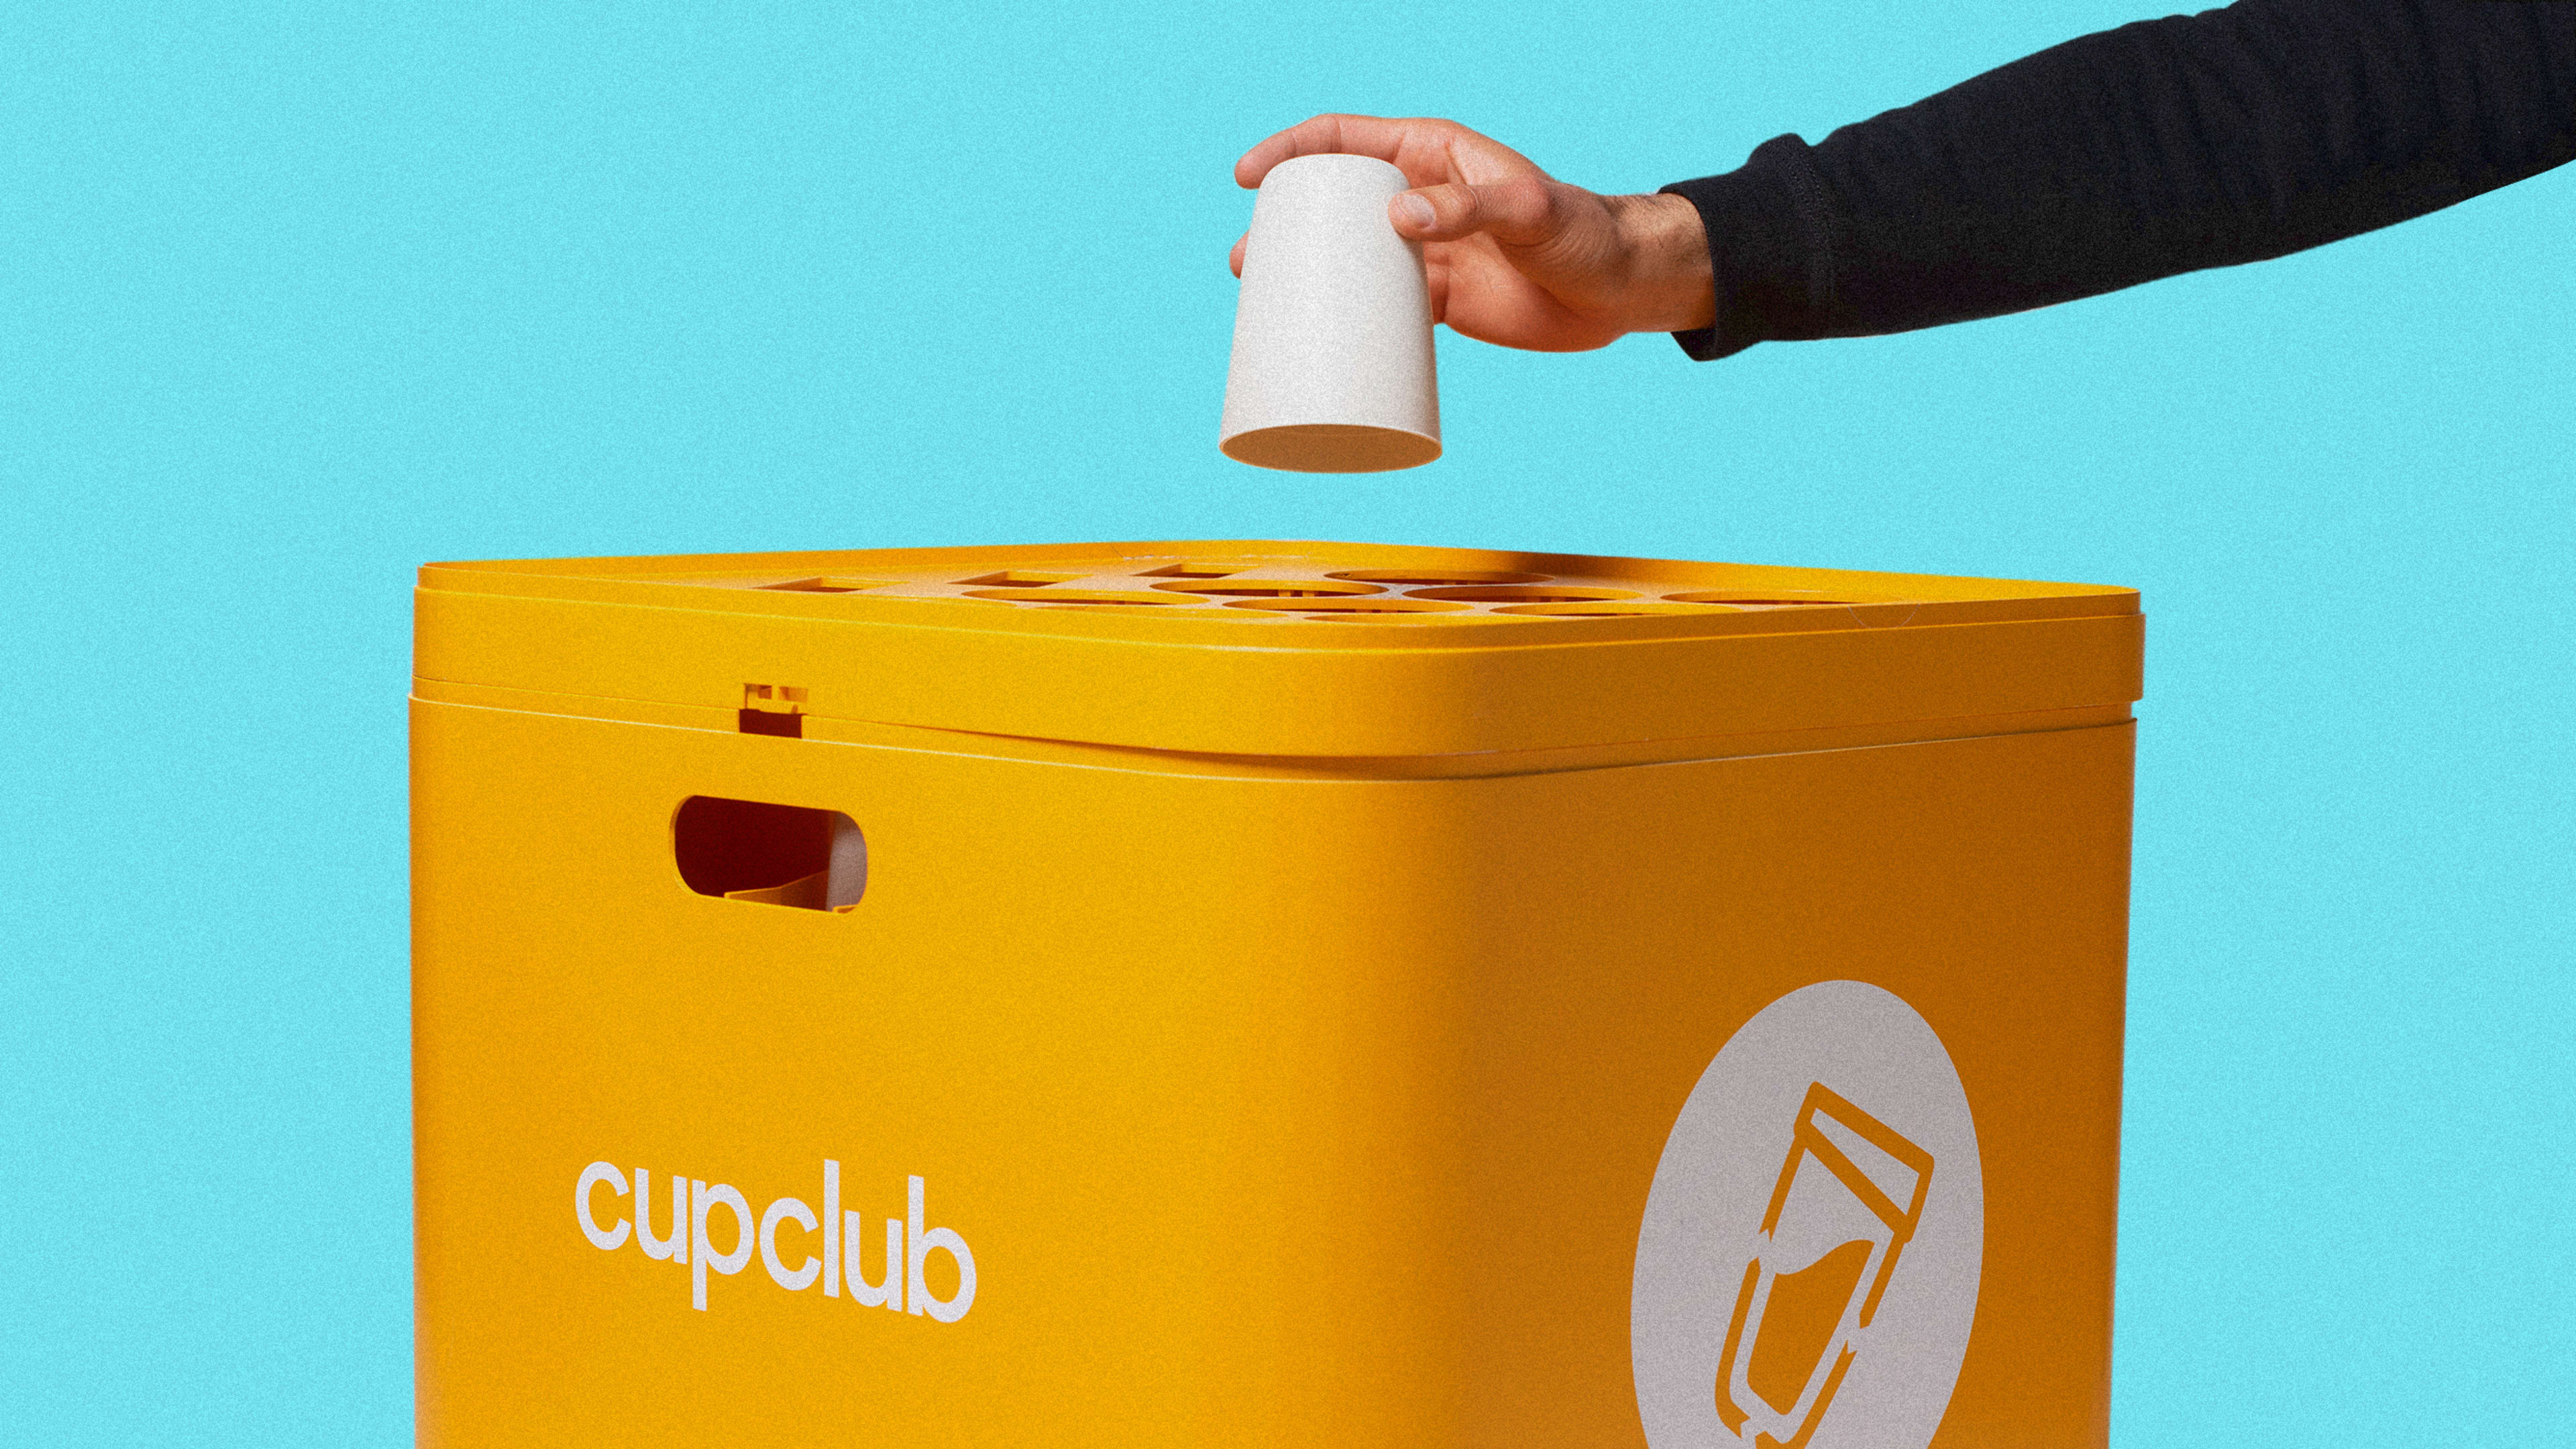 This coffee cup can be reused 132 times. Here’s how to try one